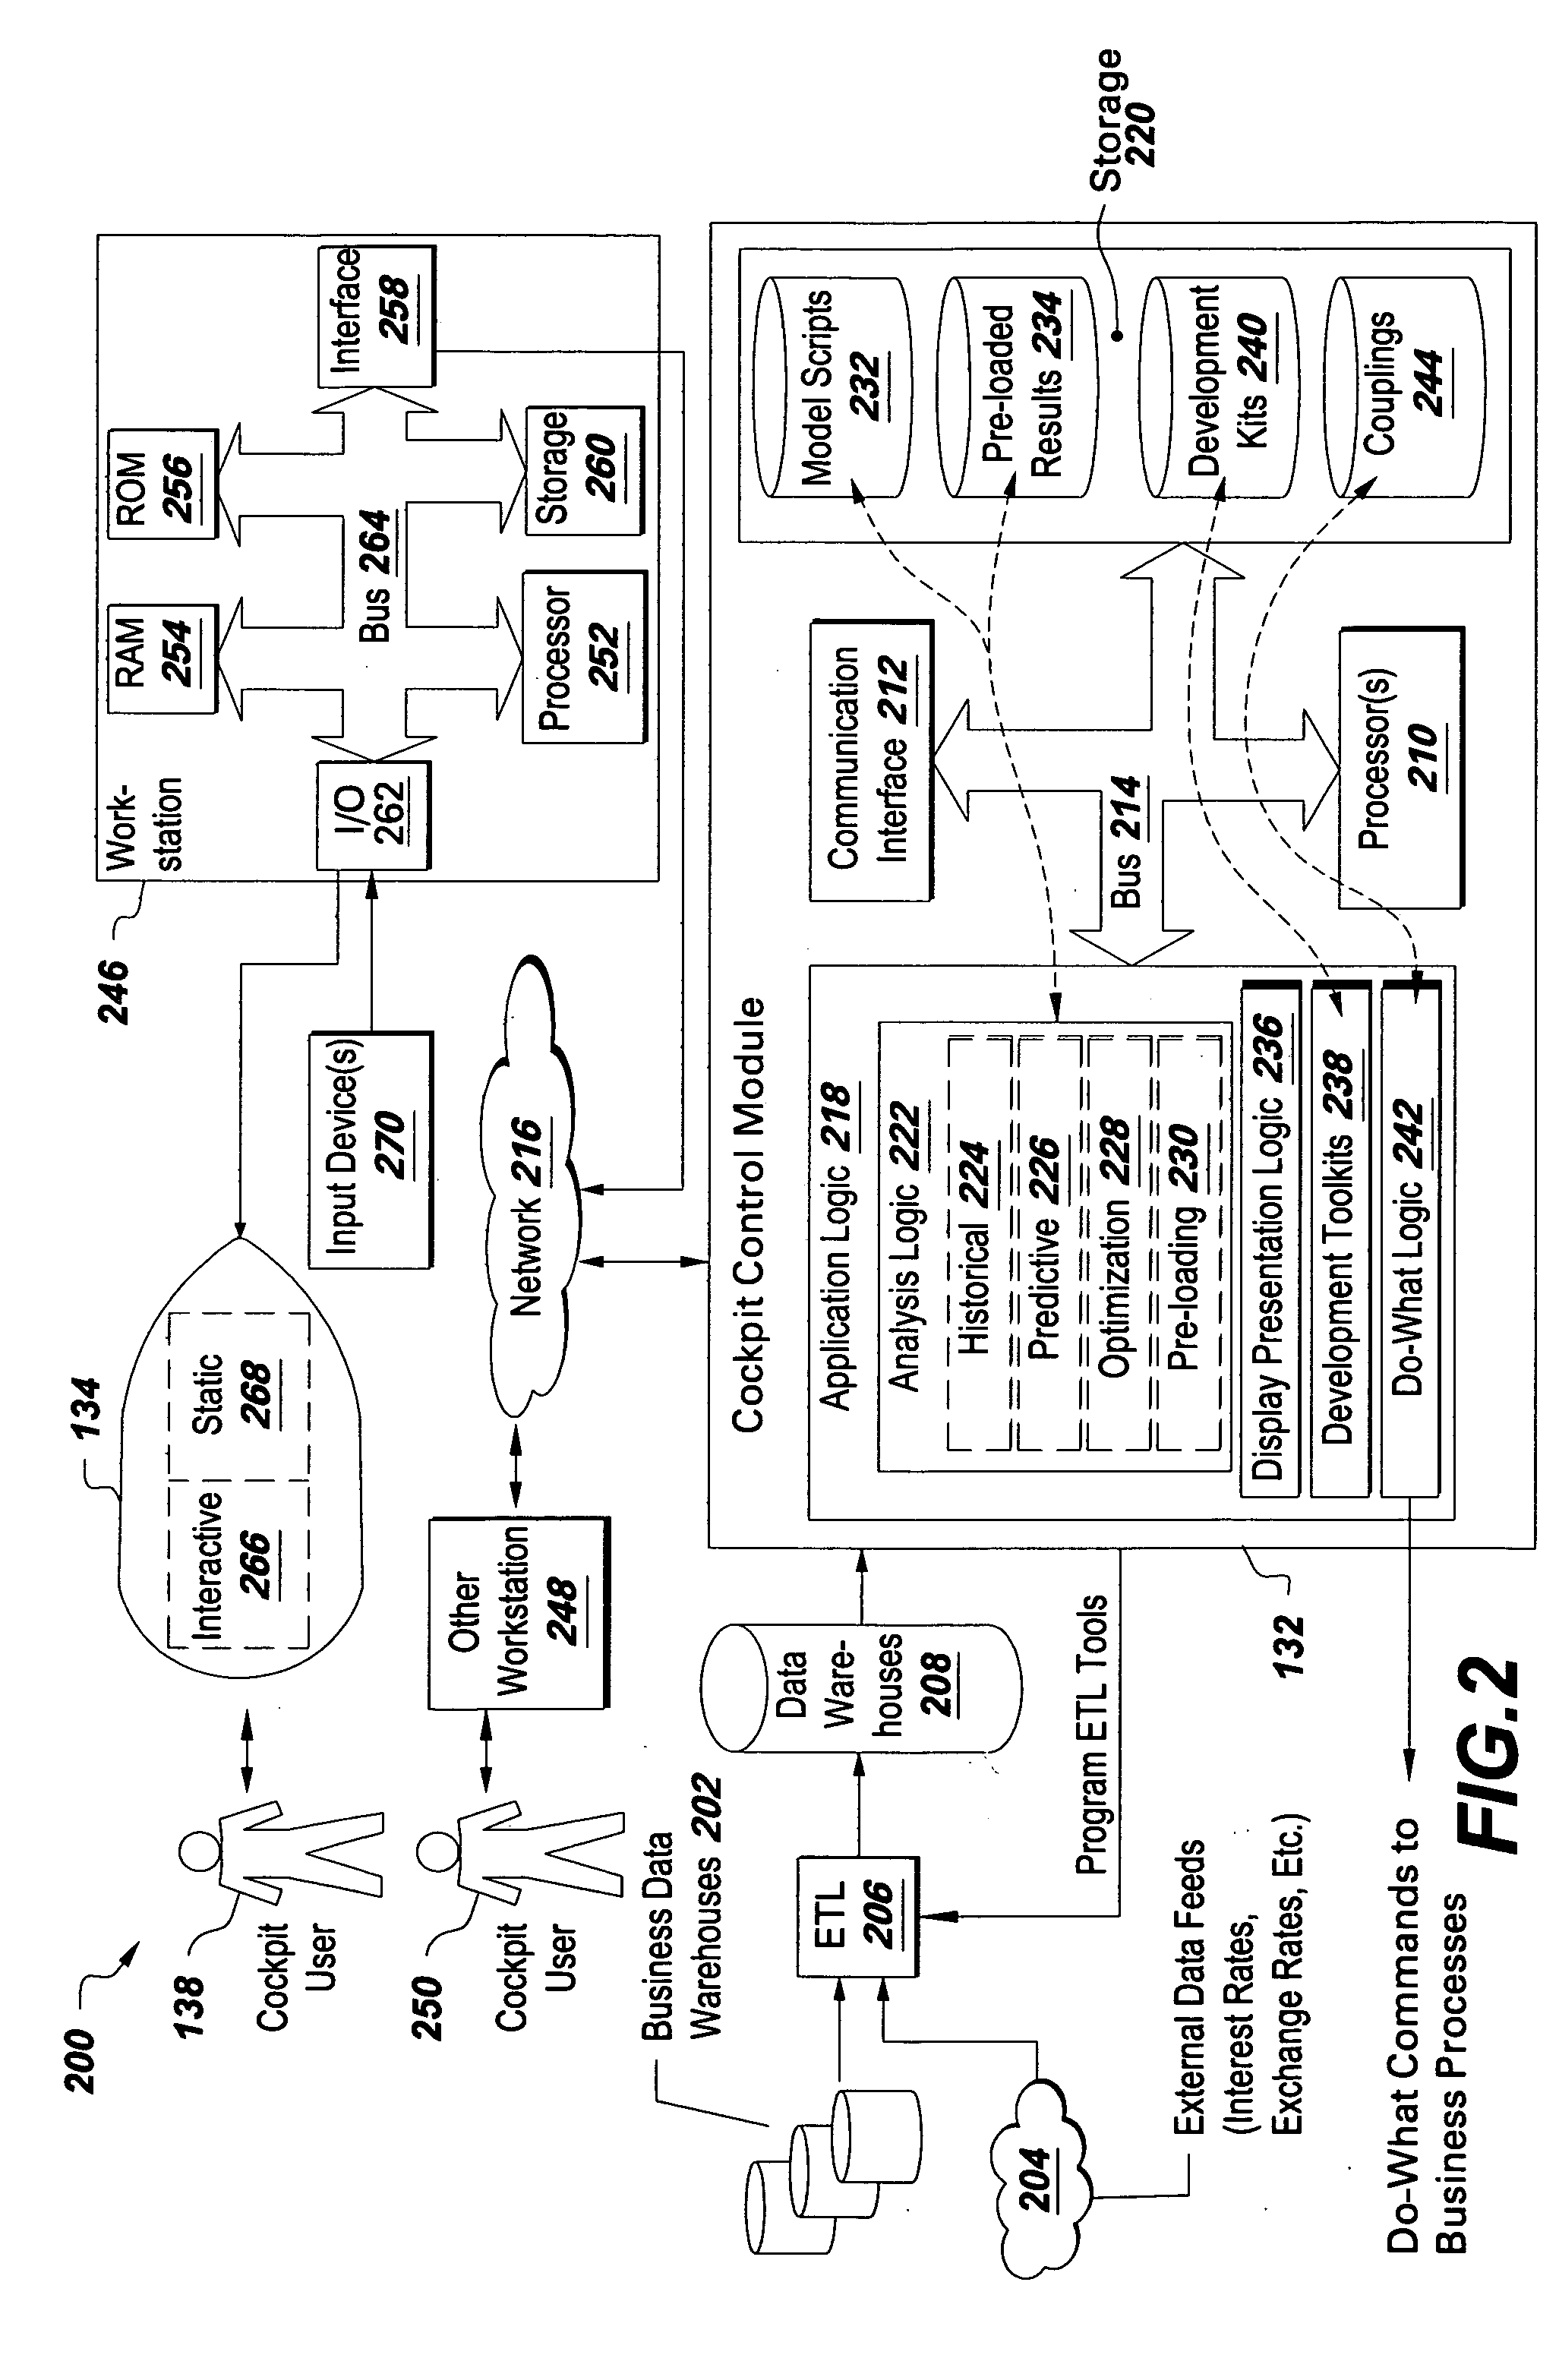 Method for the use of and interaction with business system transfer functions